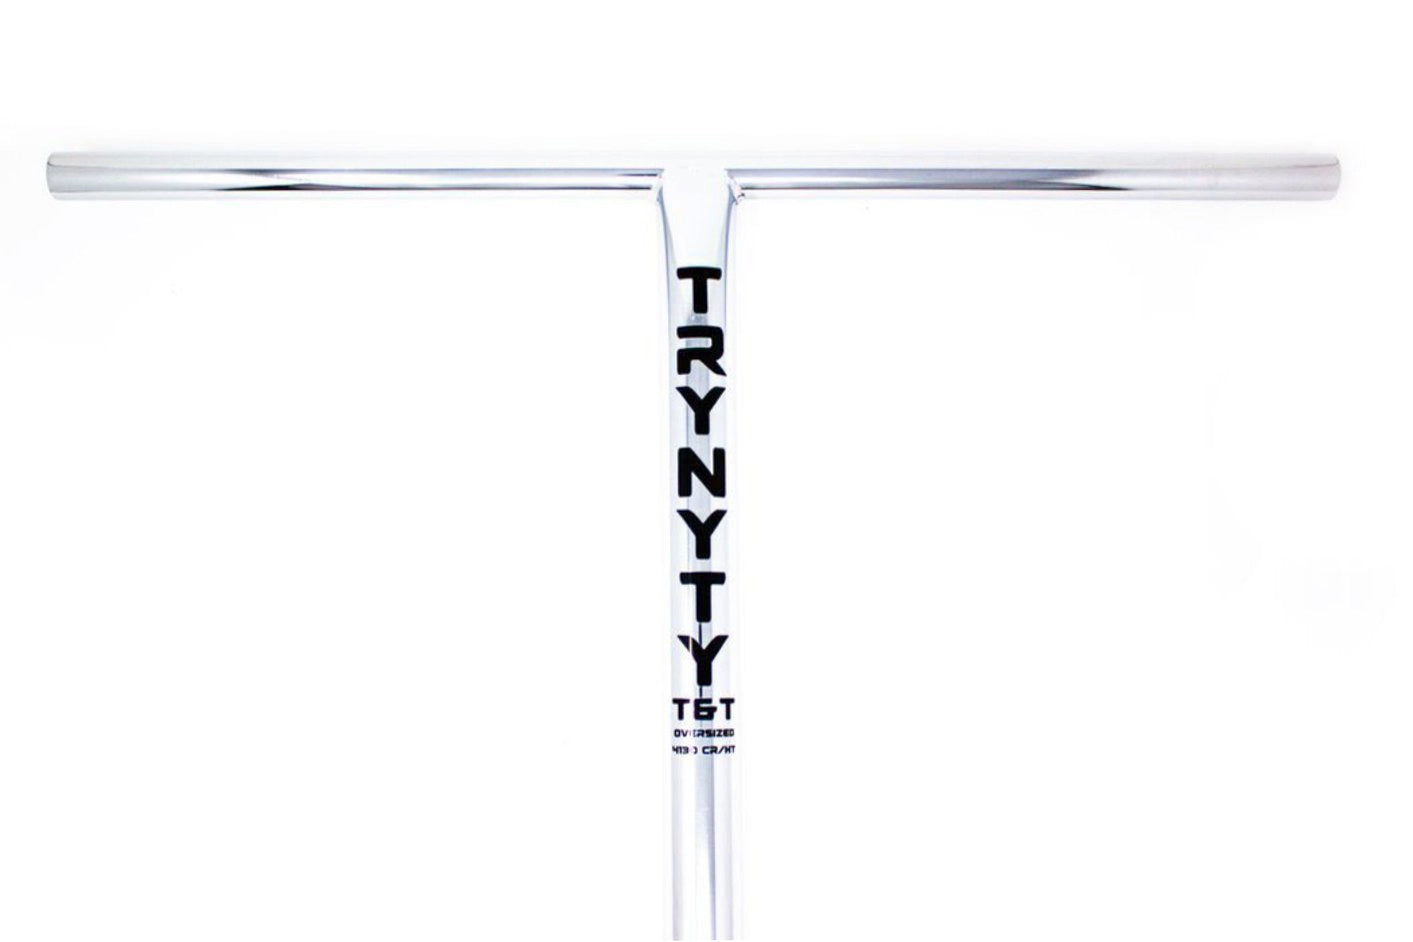 trynyty-bar-tnt-chrome-trottinette-scooter